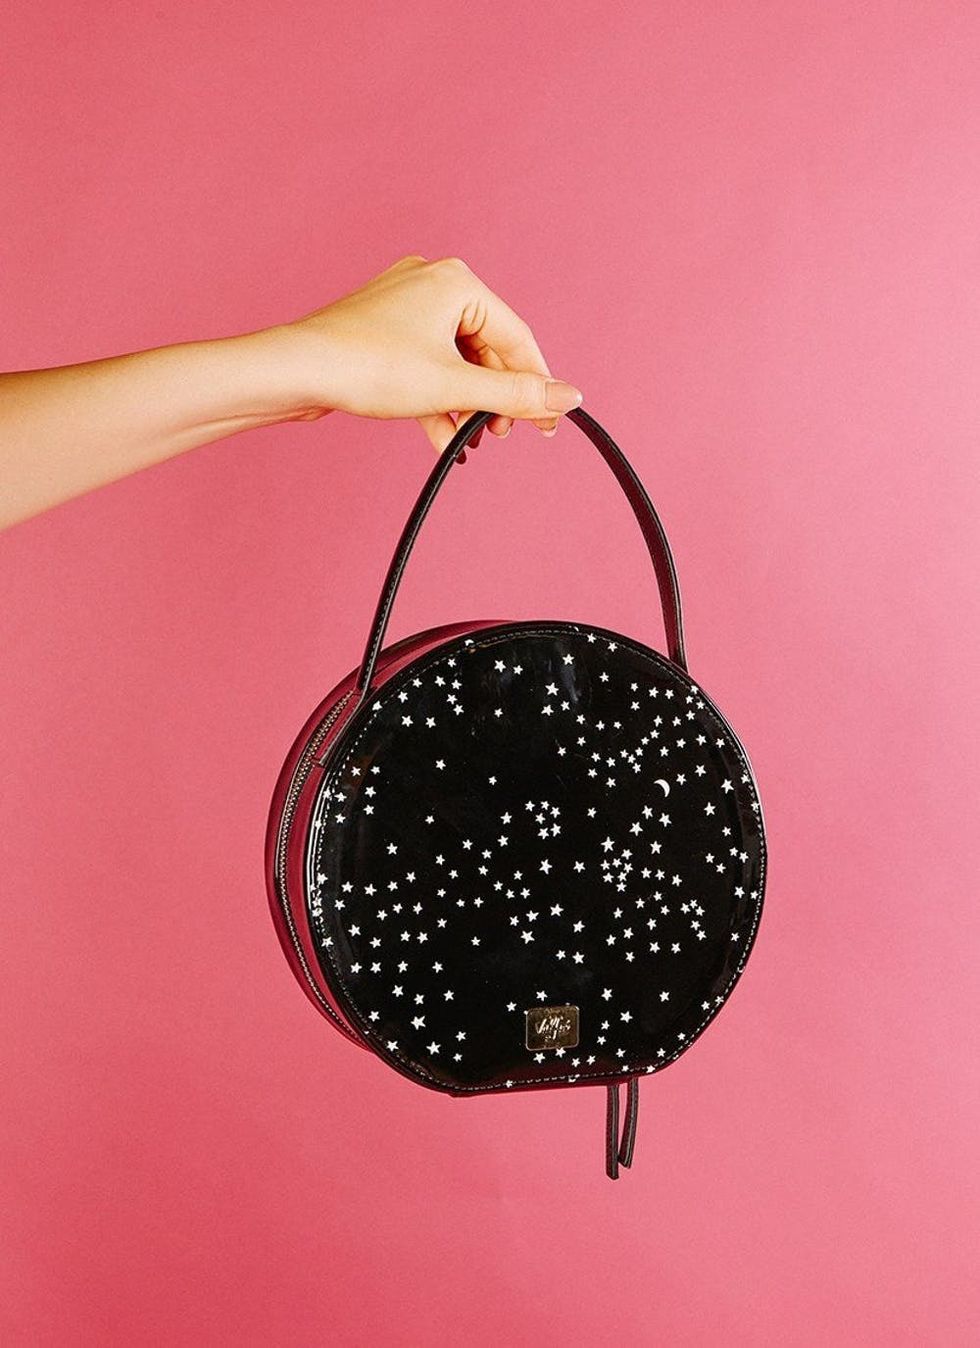 These 6 Polène bags are all you will ever need to complete your